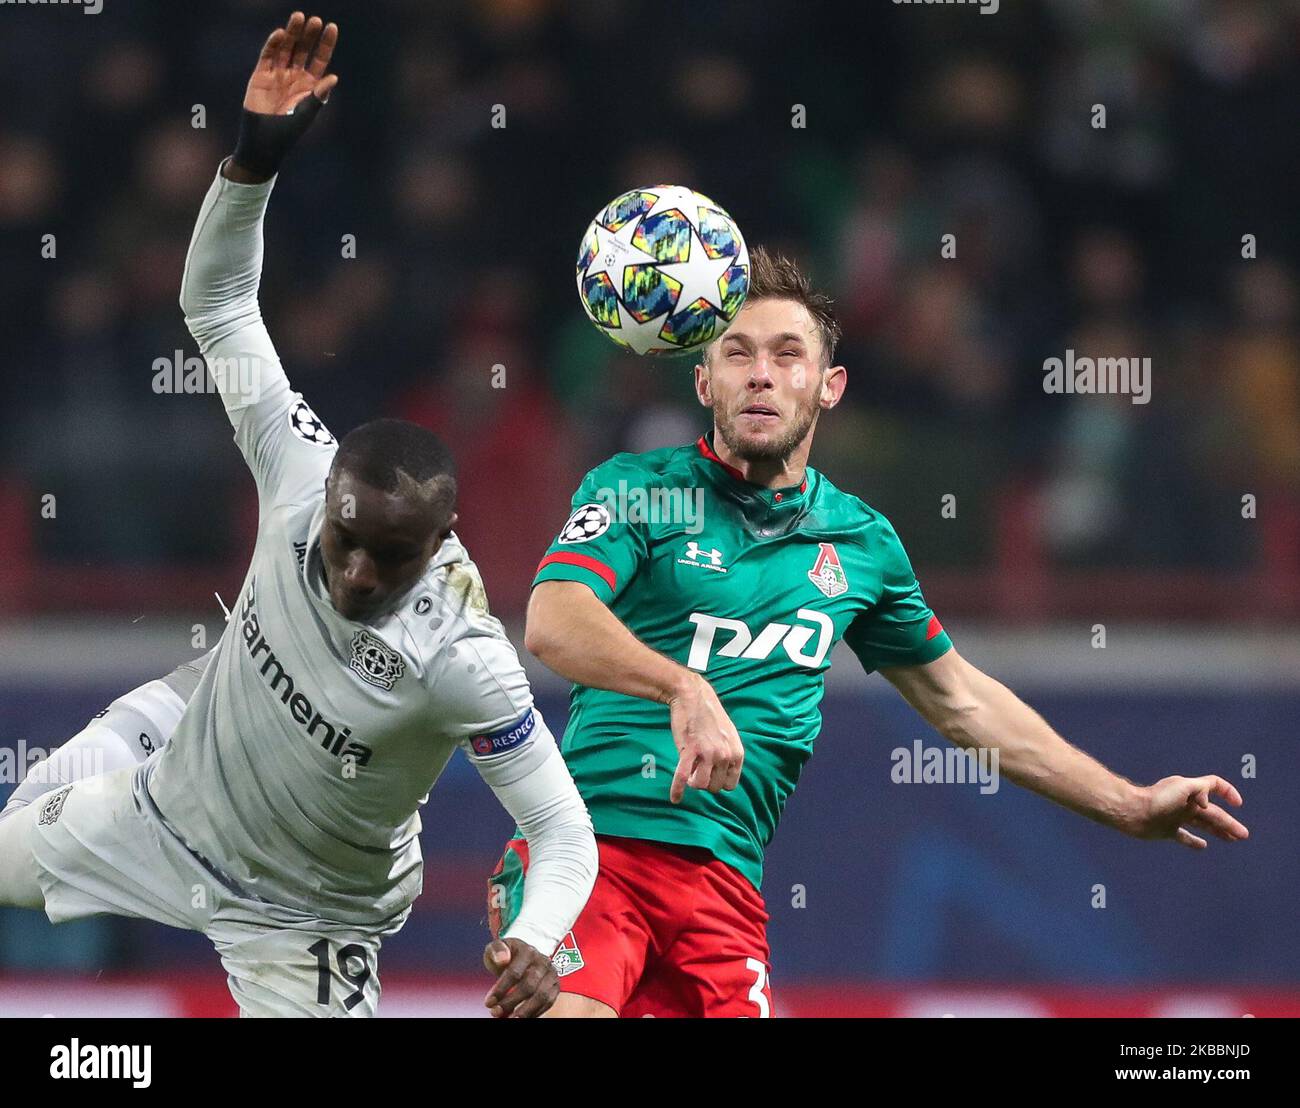 Moussa Diaby of Bayer Leverkusen (L) and Maciej Rybus of FC Lokomotiv Moskva vie for the ball during the UEFA Champions League group D match between FC Lokomotiv Moskva and Bayer Leverkusen at RZD Arena on November 26, 2019 in Moscow, Russia. (Photo by Igor Russak/NurPhoto) Stock Photo